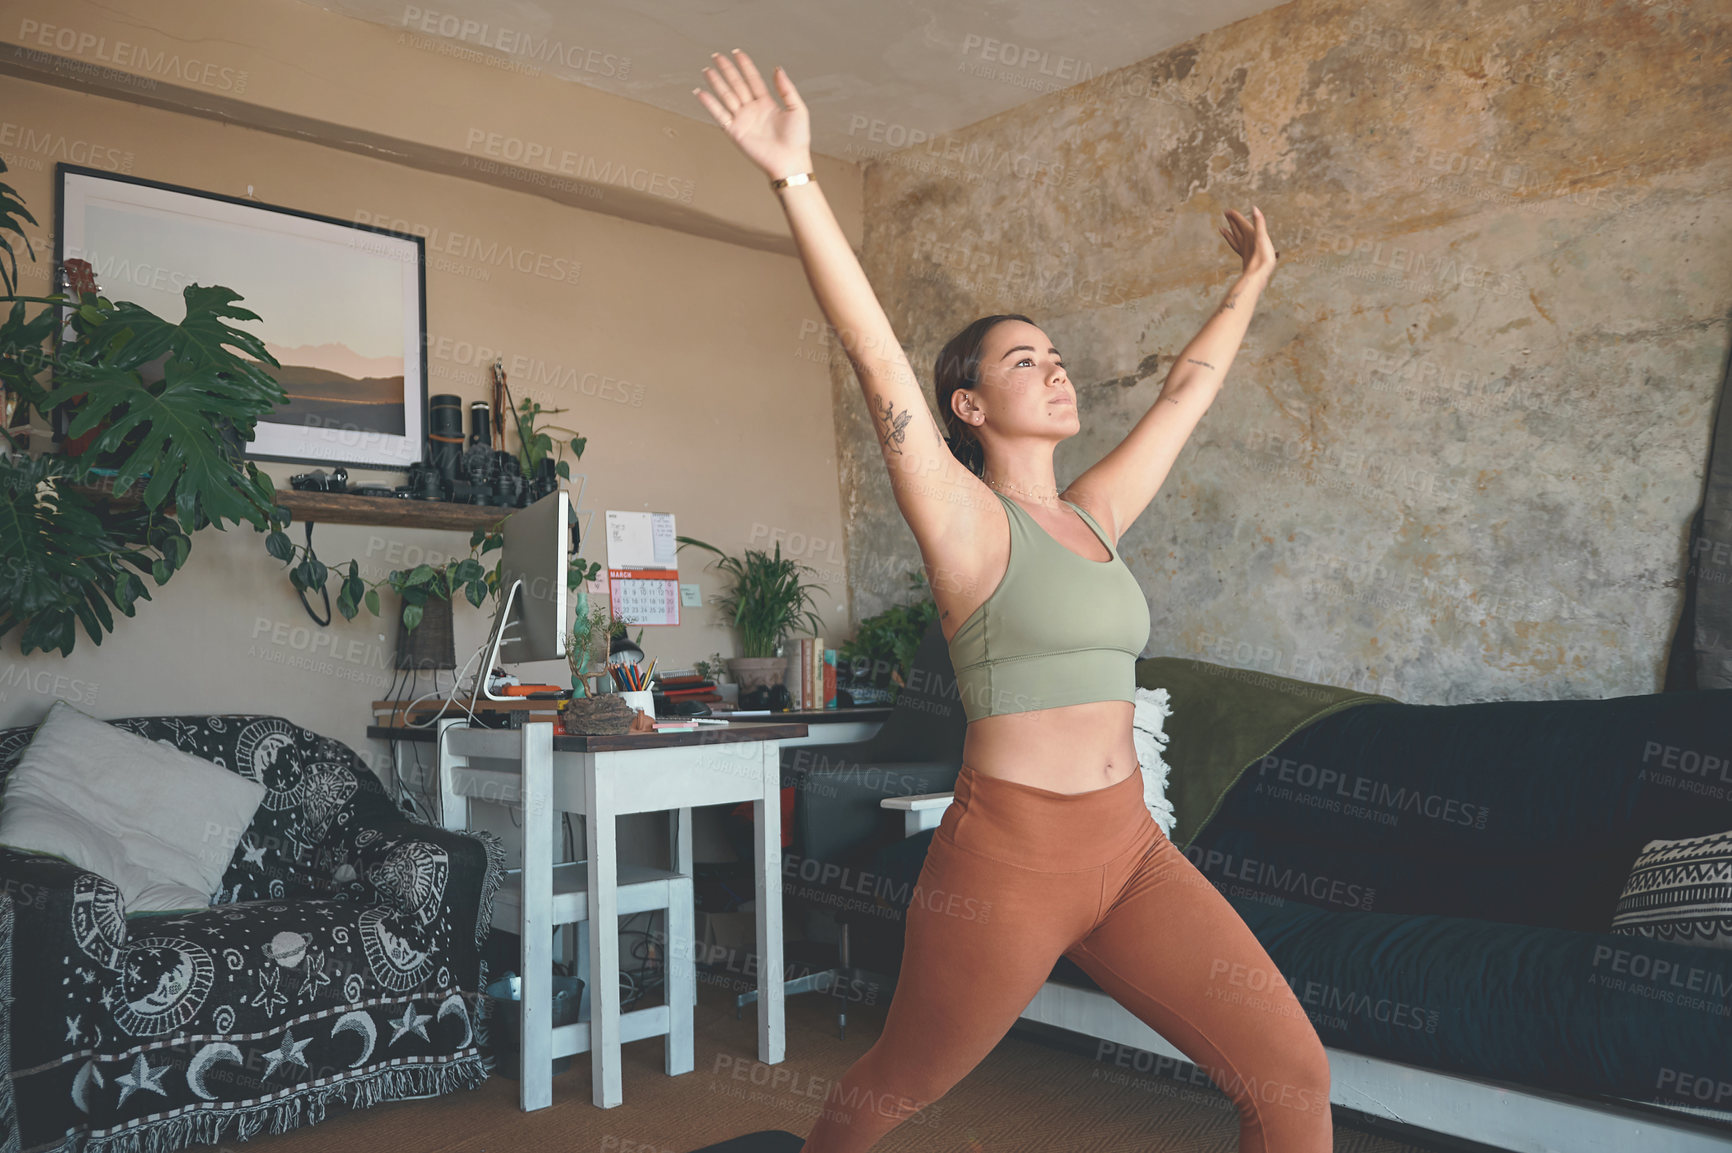 Buy stock photo Shot of a young woman exercising at home